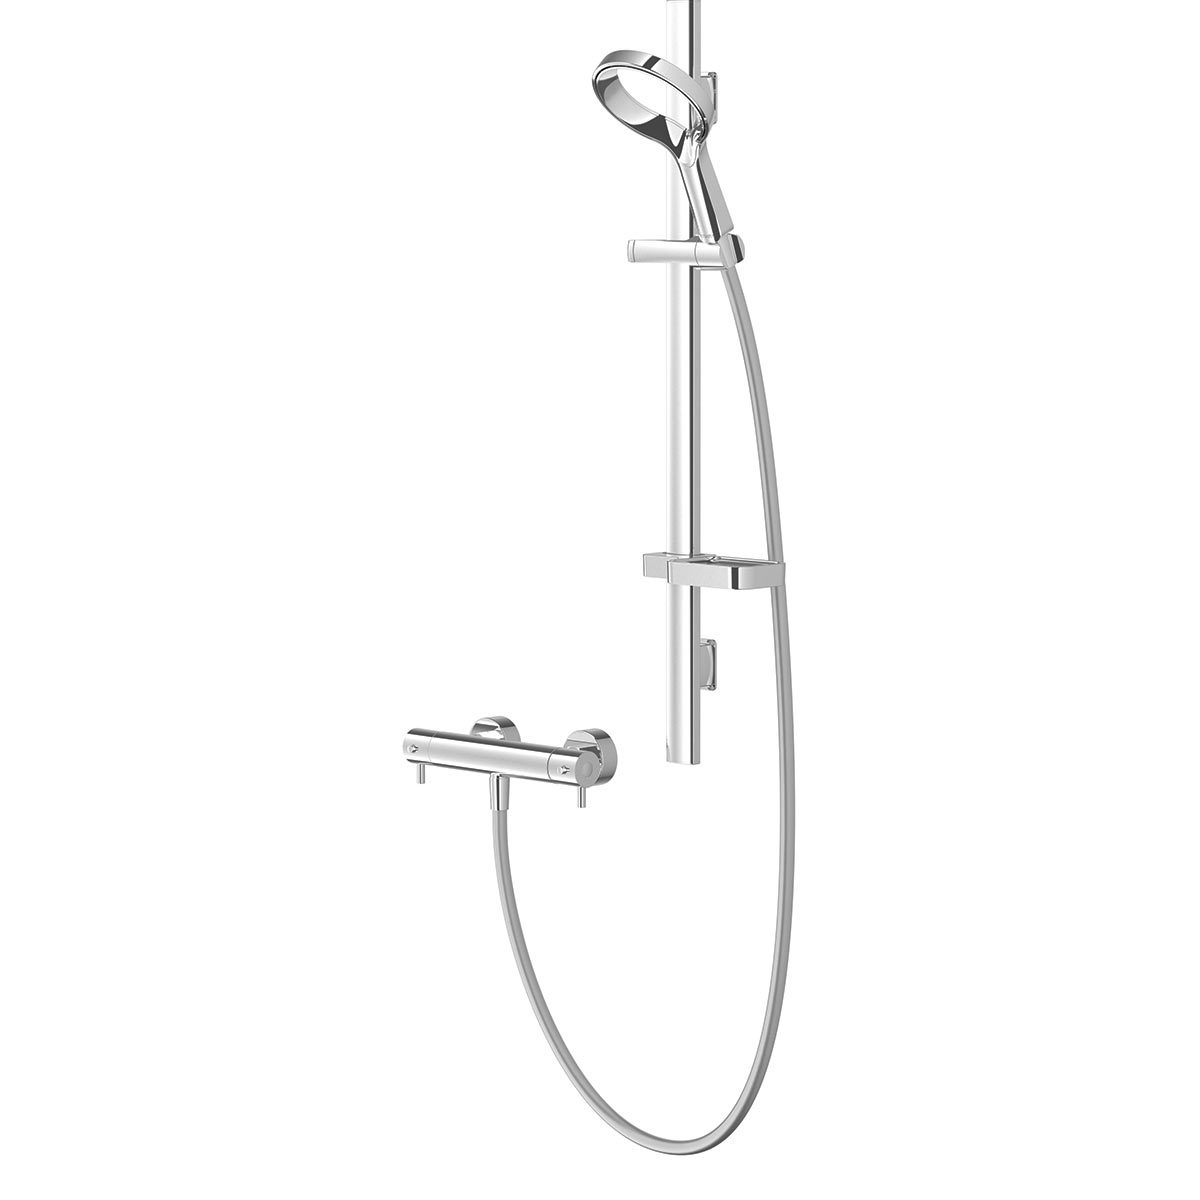 Methven Aurajet Aio Cool to Touch Bar Shower - Model AOCTSCPUK